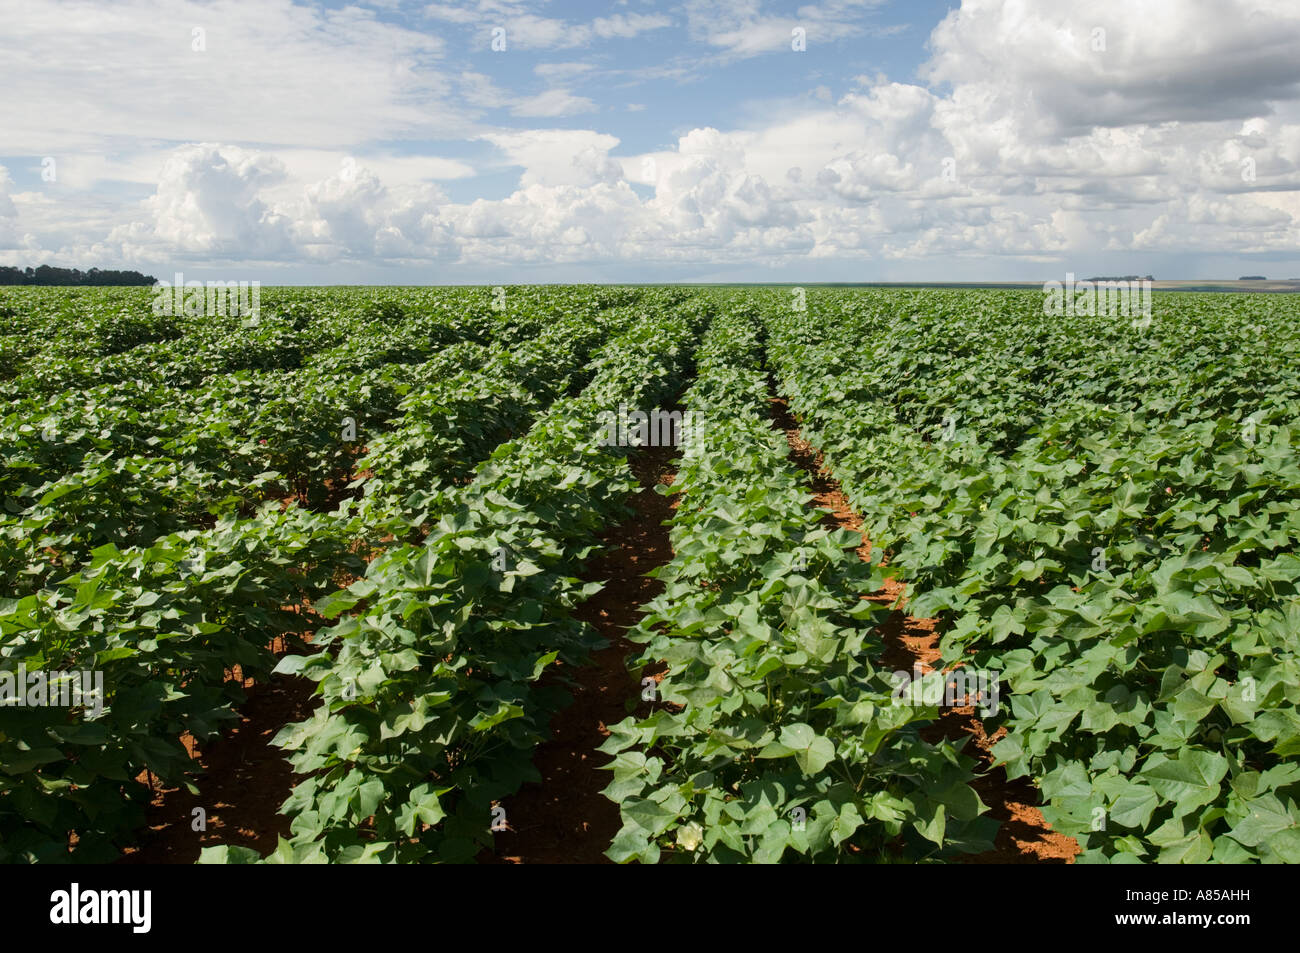 Near Mineirds next to the BR364 road in Brazil rows of soya bean (Glycine max) crops growing in a field. Stock Photo